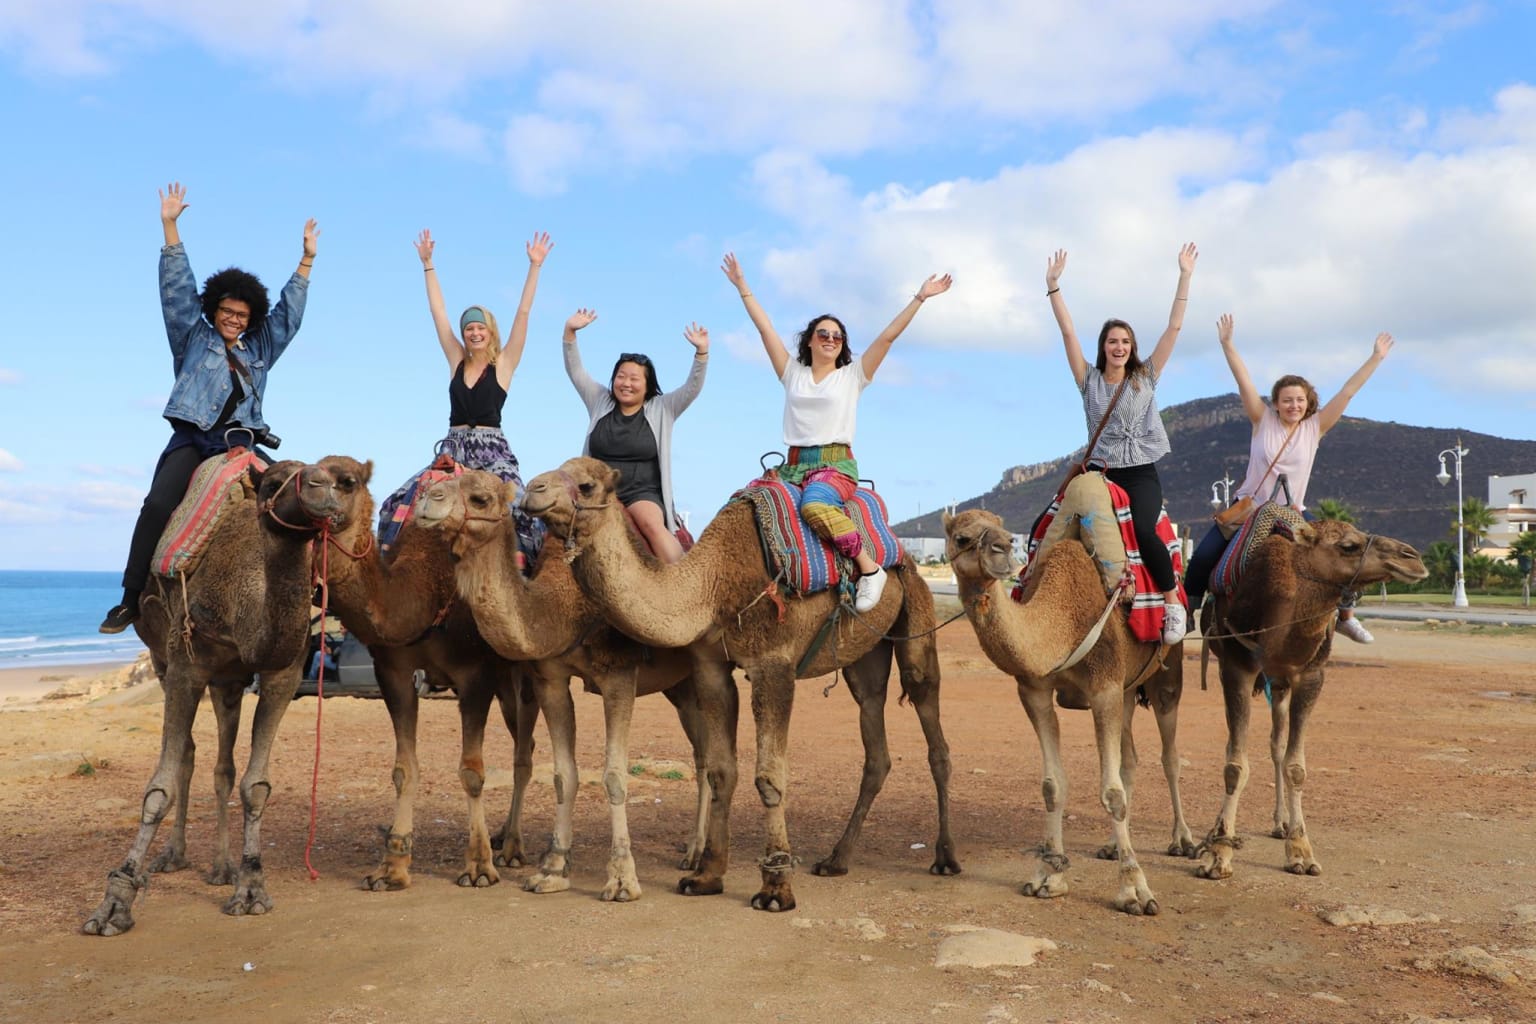 People on camels with their arms in the air.